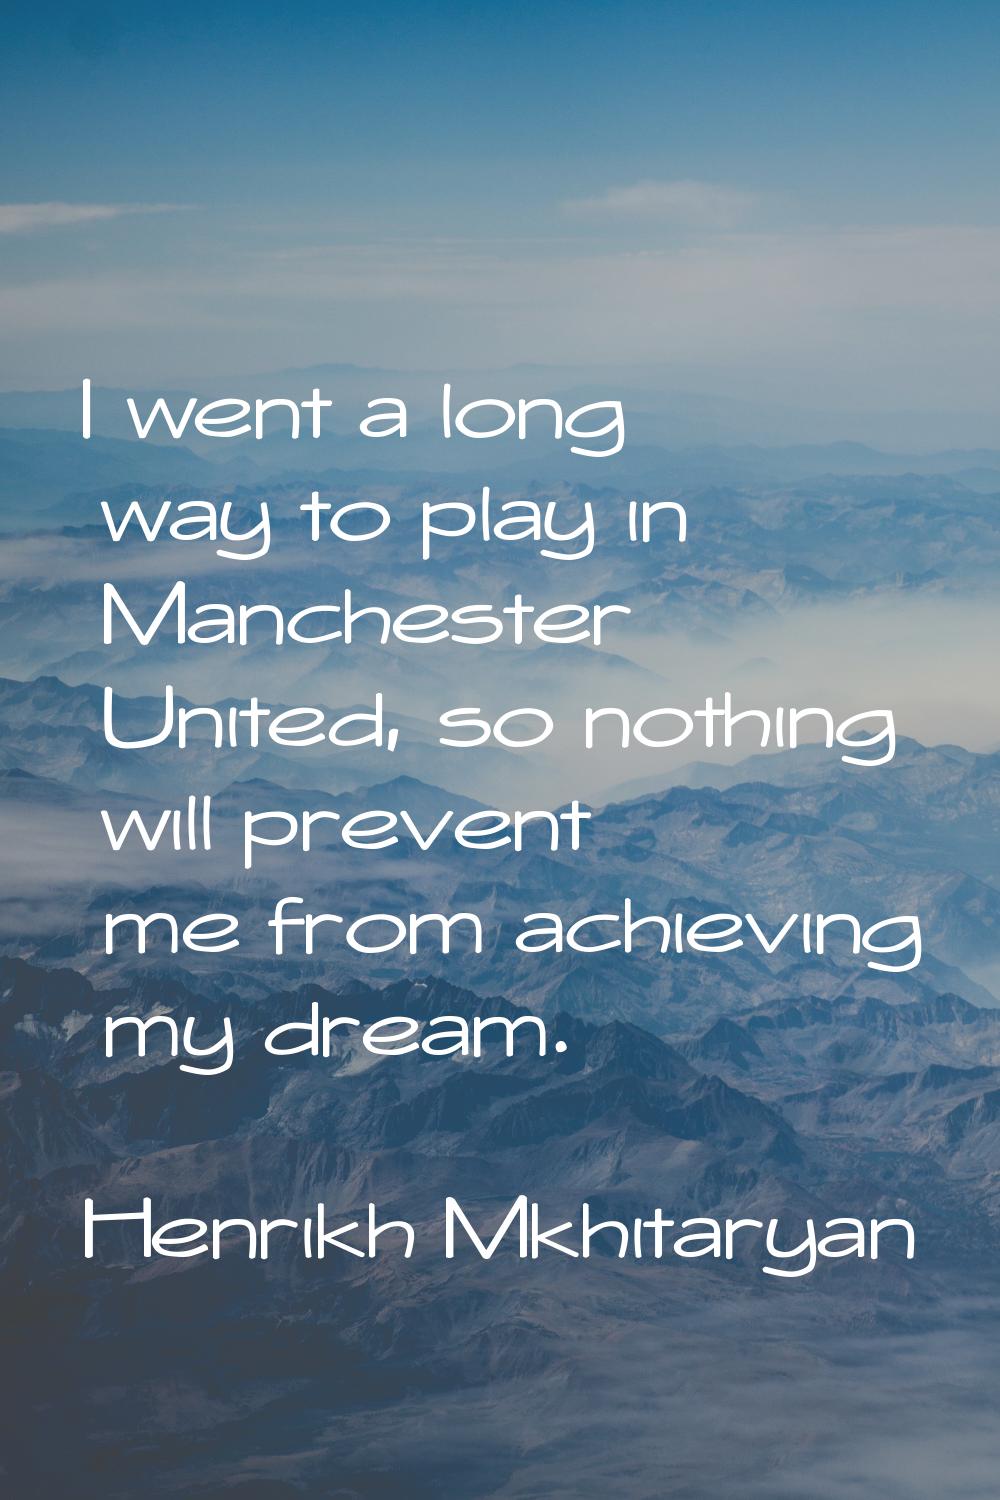 I went a long way to play in Manchester United, so nothing will prevent me from achieving my dream.